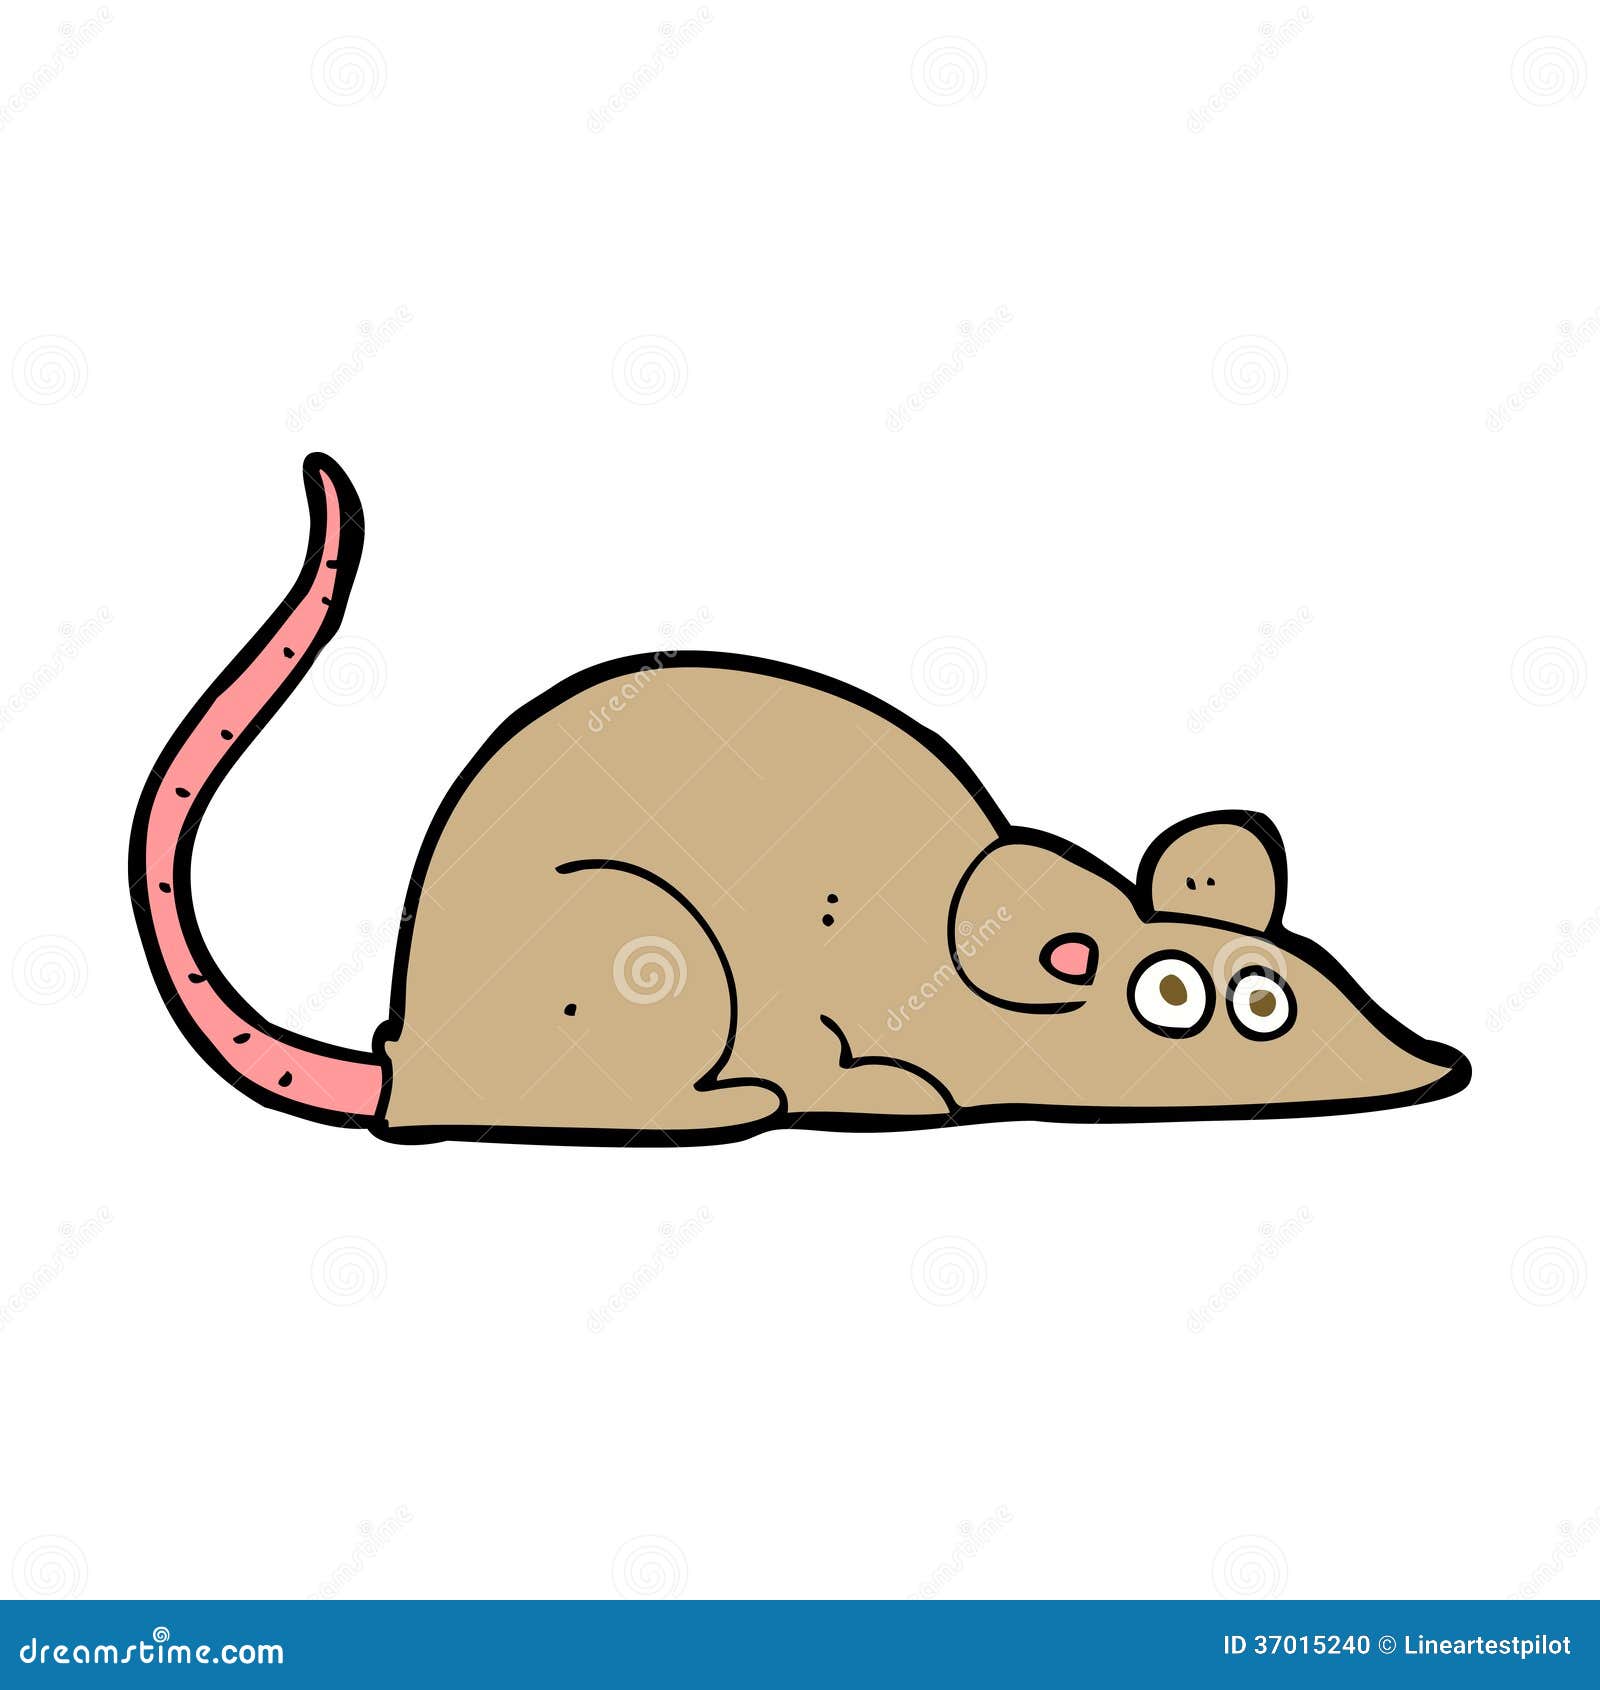 mouse house clipart - photo #43